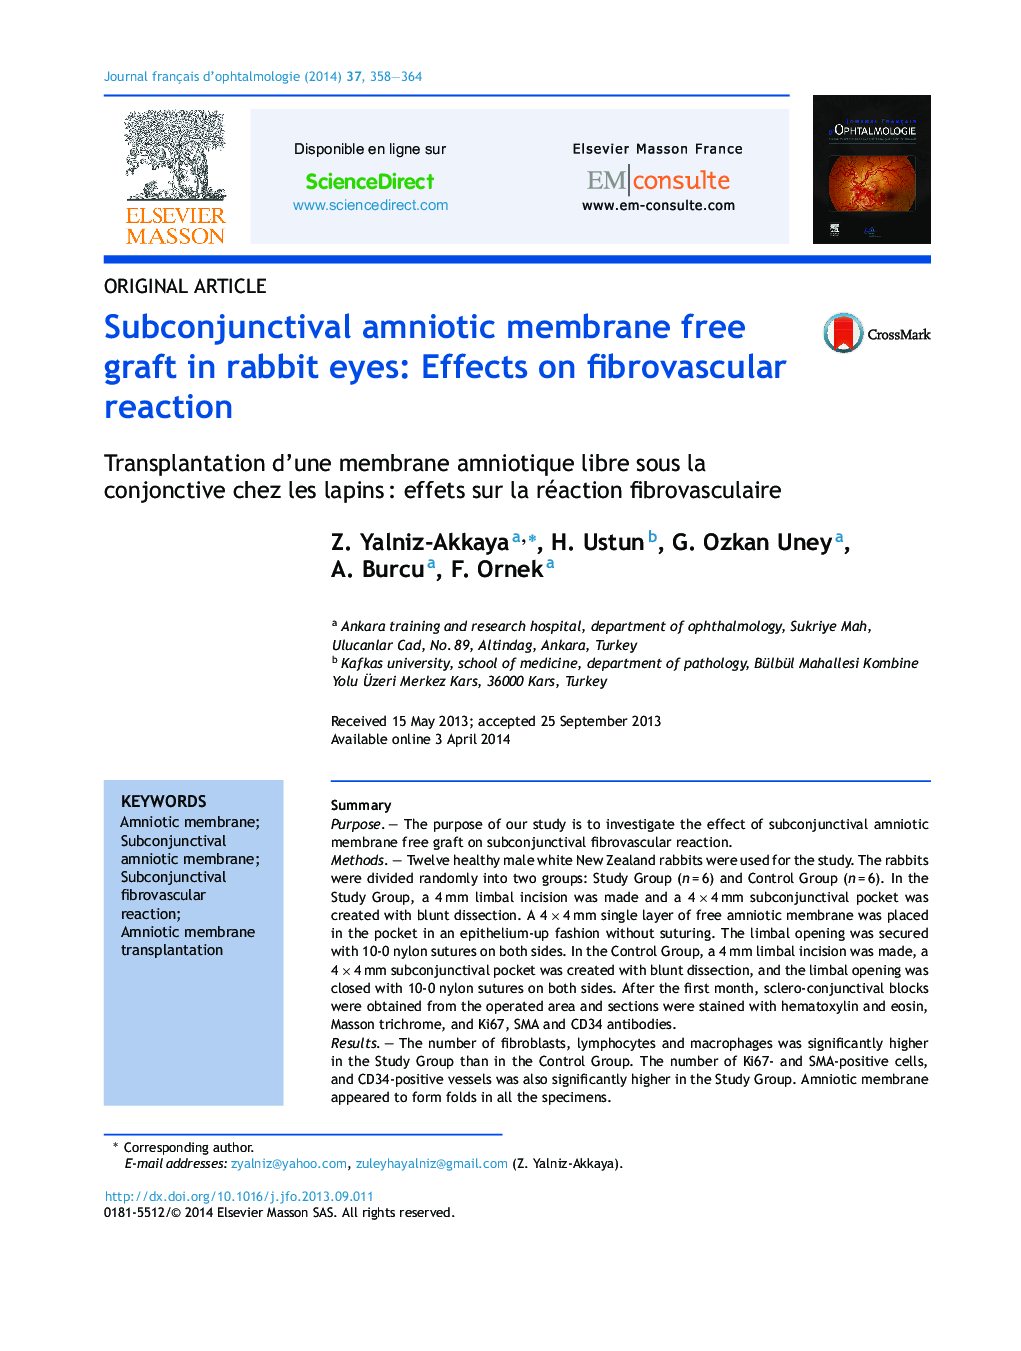 Subconjunctival amniotic membrane free graft in rabbit eyes: Effects on fibrovascular reaction